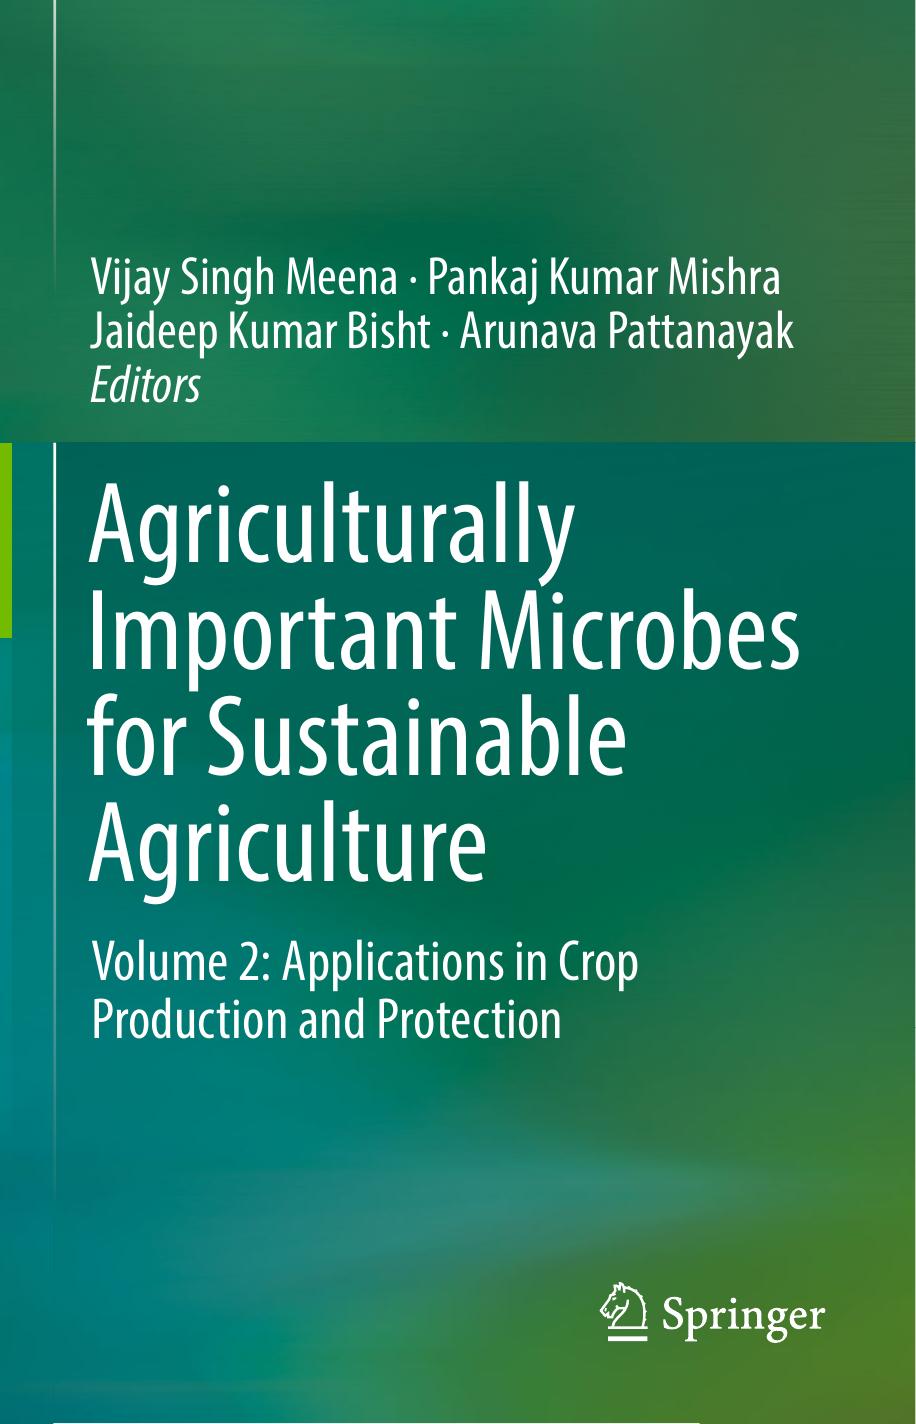 Agriculturally important microbes for sustainable agriculture. Volume 2, 2017